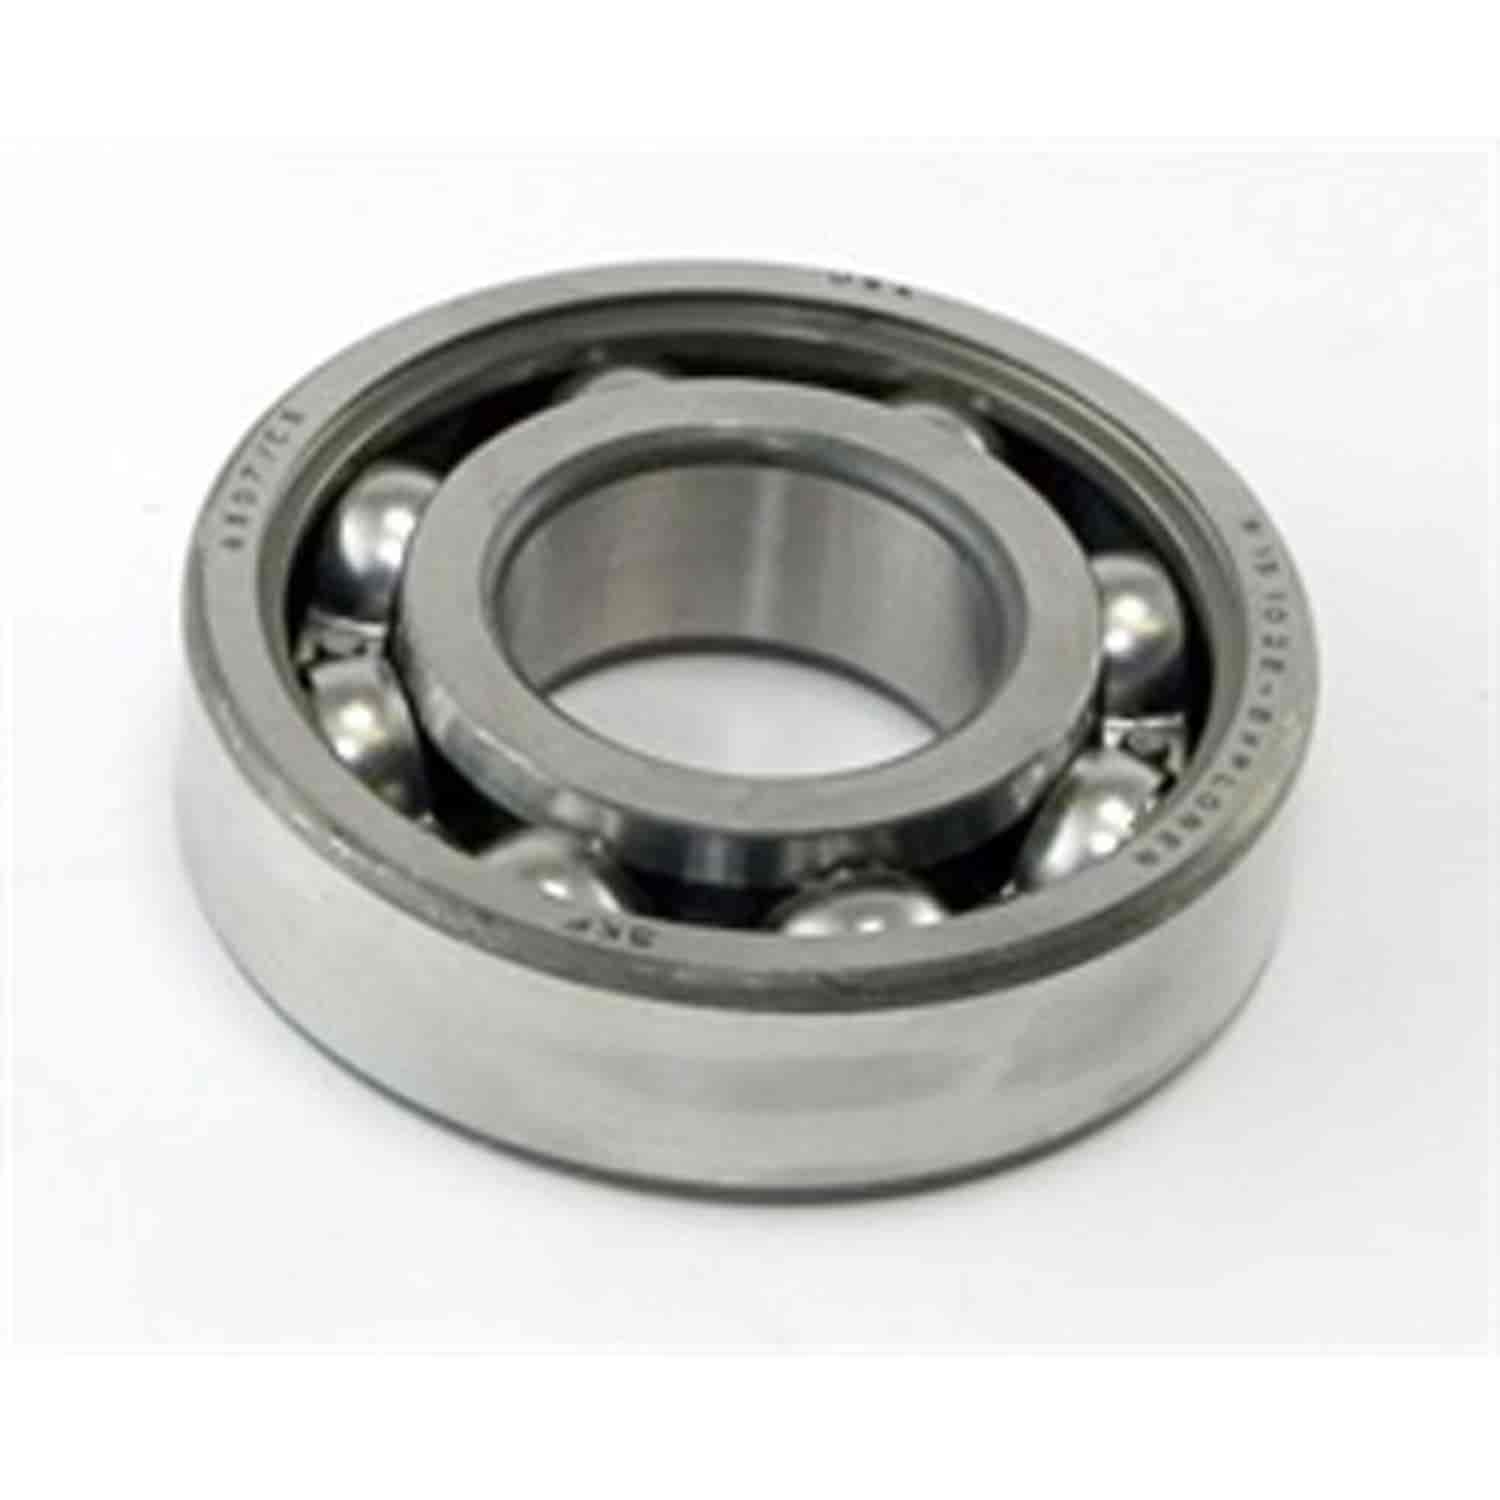 This rear main shaft transmission bearing from Omix-ADA fits T84 transmissions found in 41-45 Willys MBs and Ford GPWs.